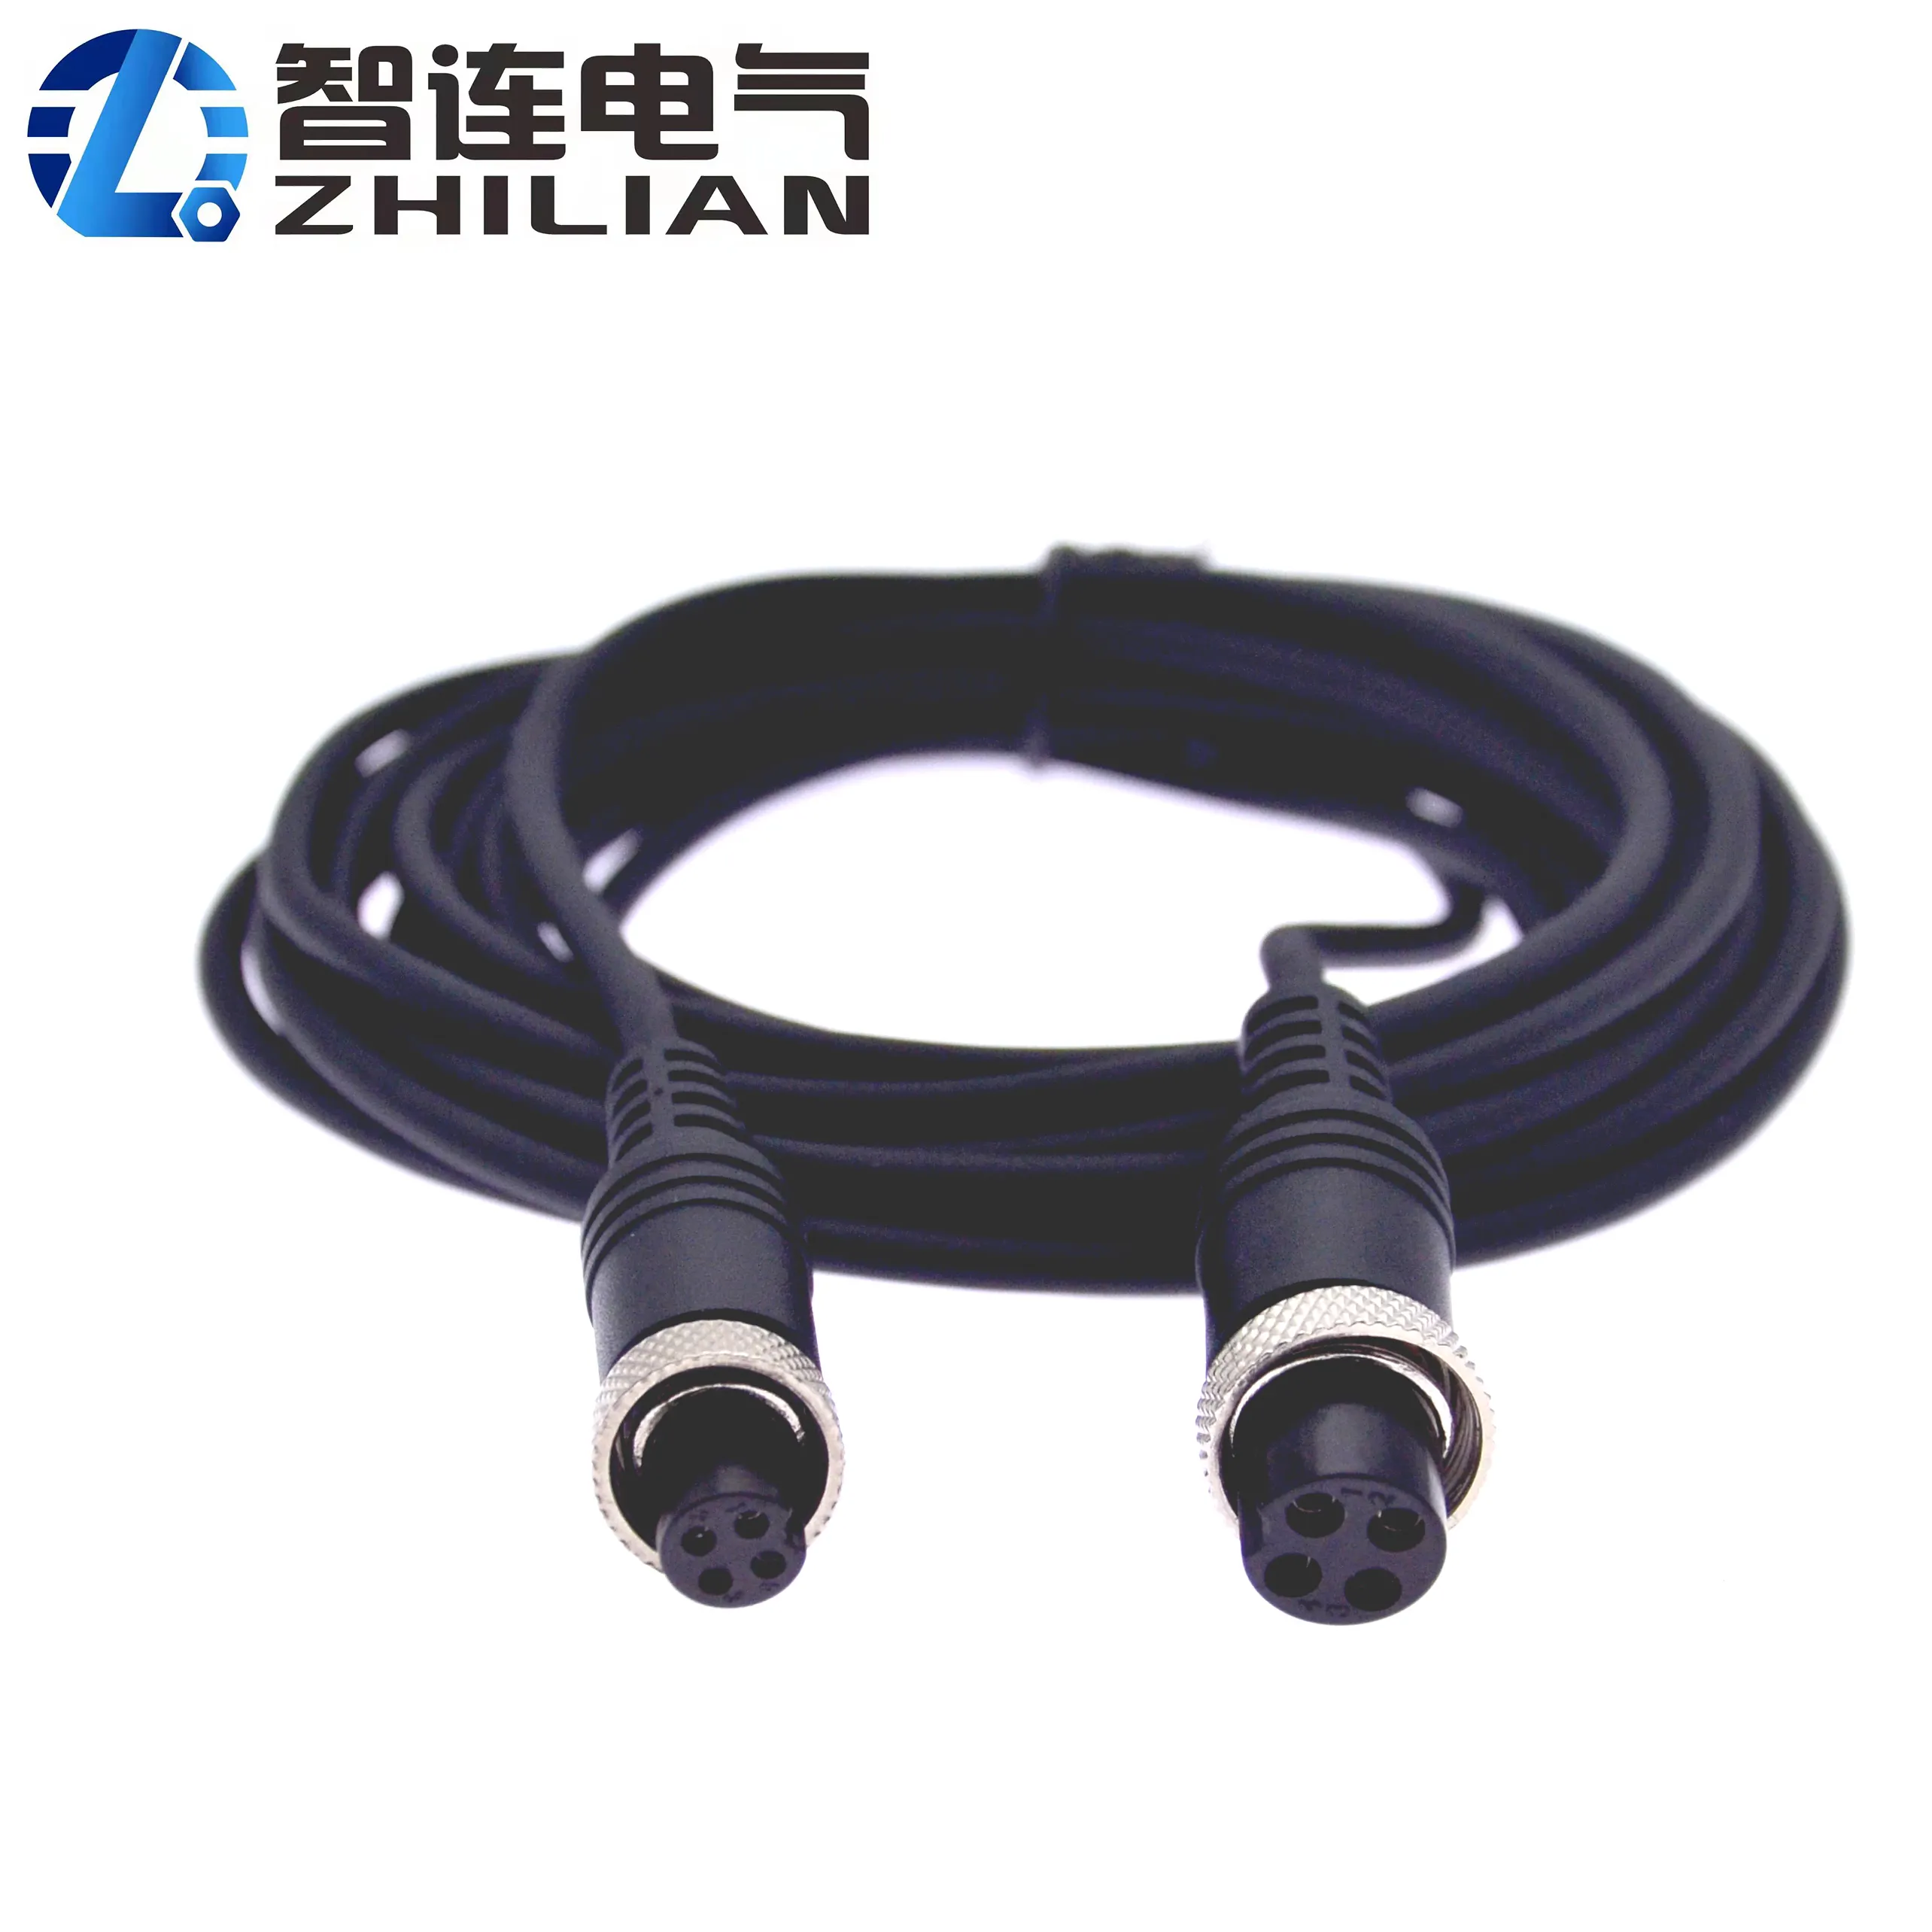 high quality aviation connector GX12 4pins female to GX16 4pins female extension cable connector for audio video connection